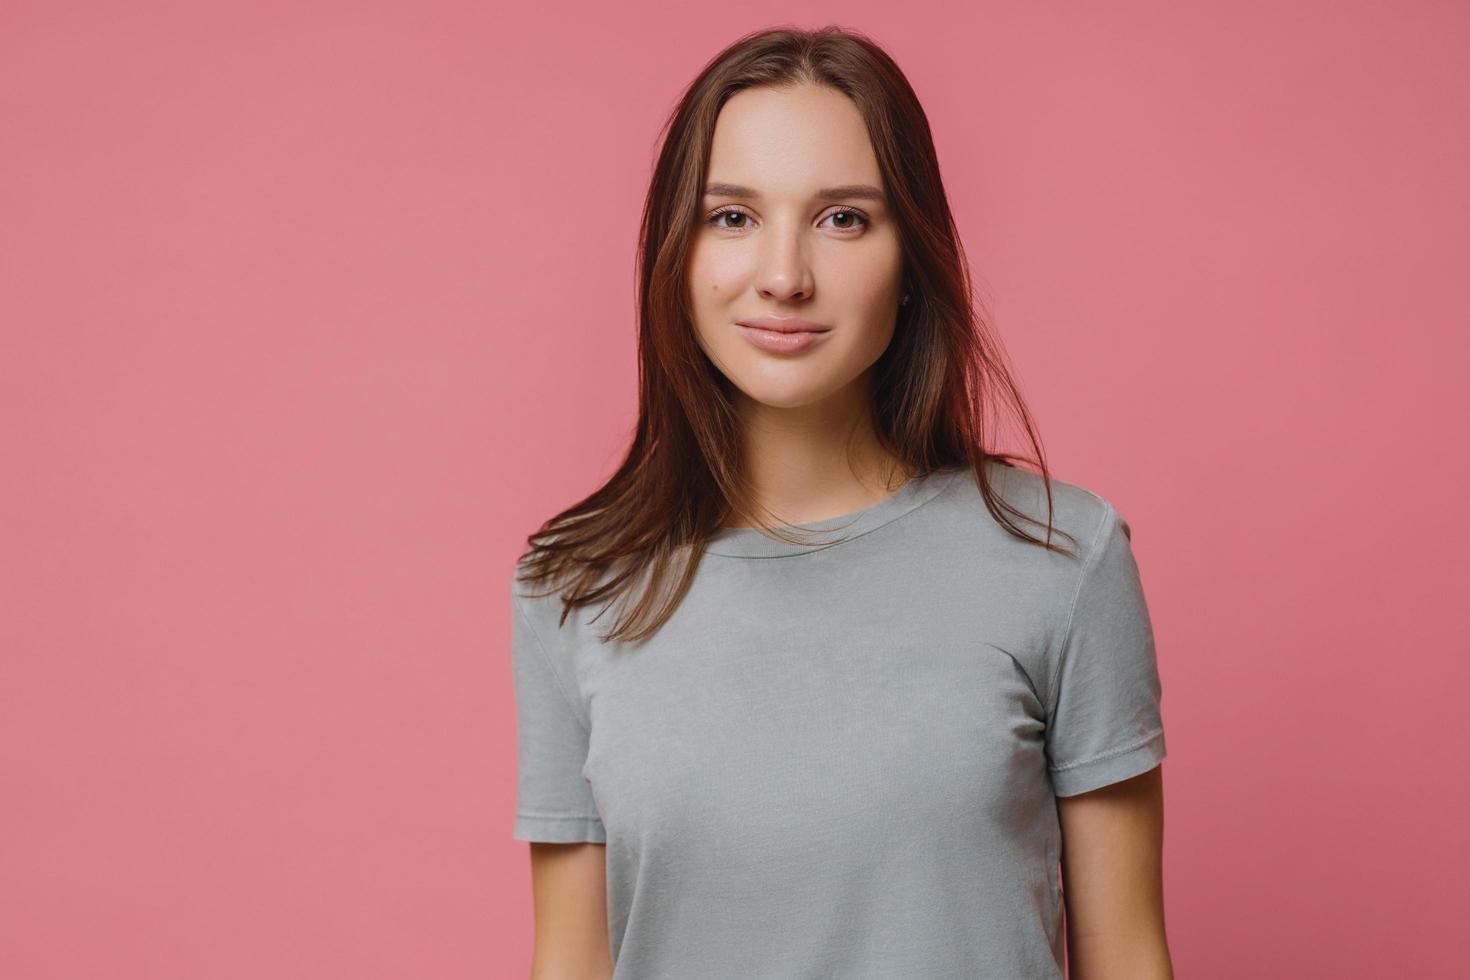 Adorable millennial girl with straight dark hair, wears casual t shirt, looks seriously at camera, has healthy skin, poses over pink background. Pleasant looking woman has talk with someone. photo